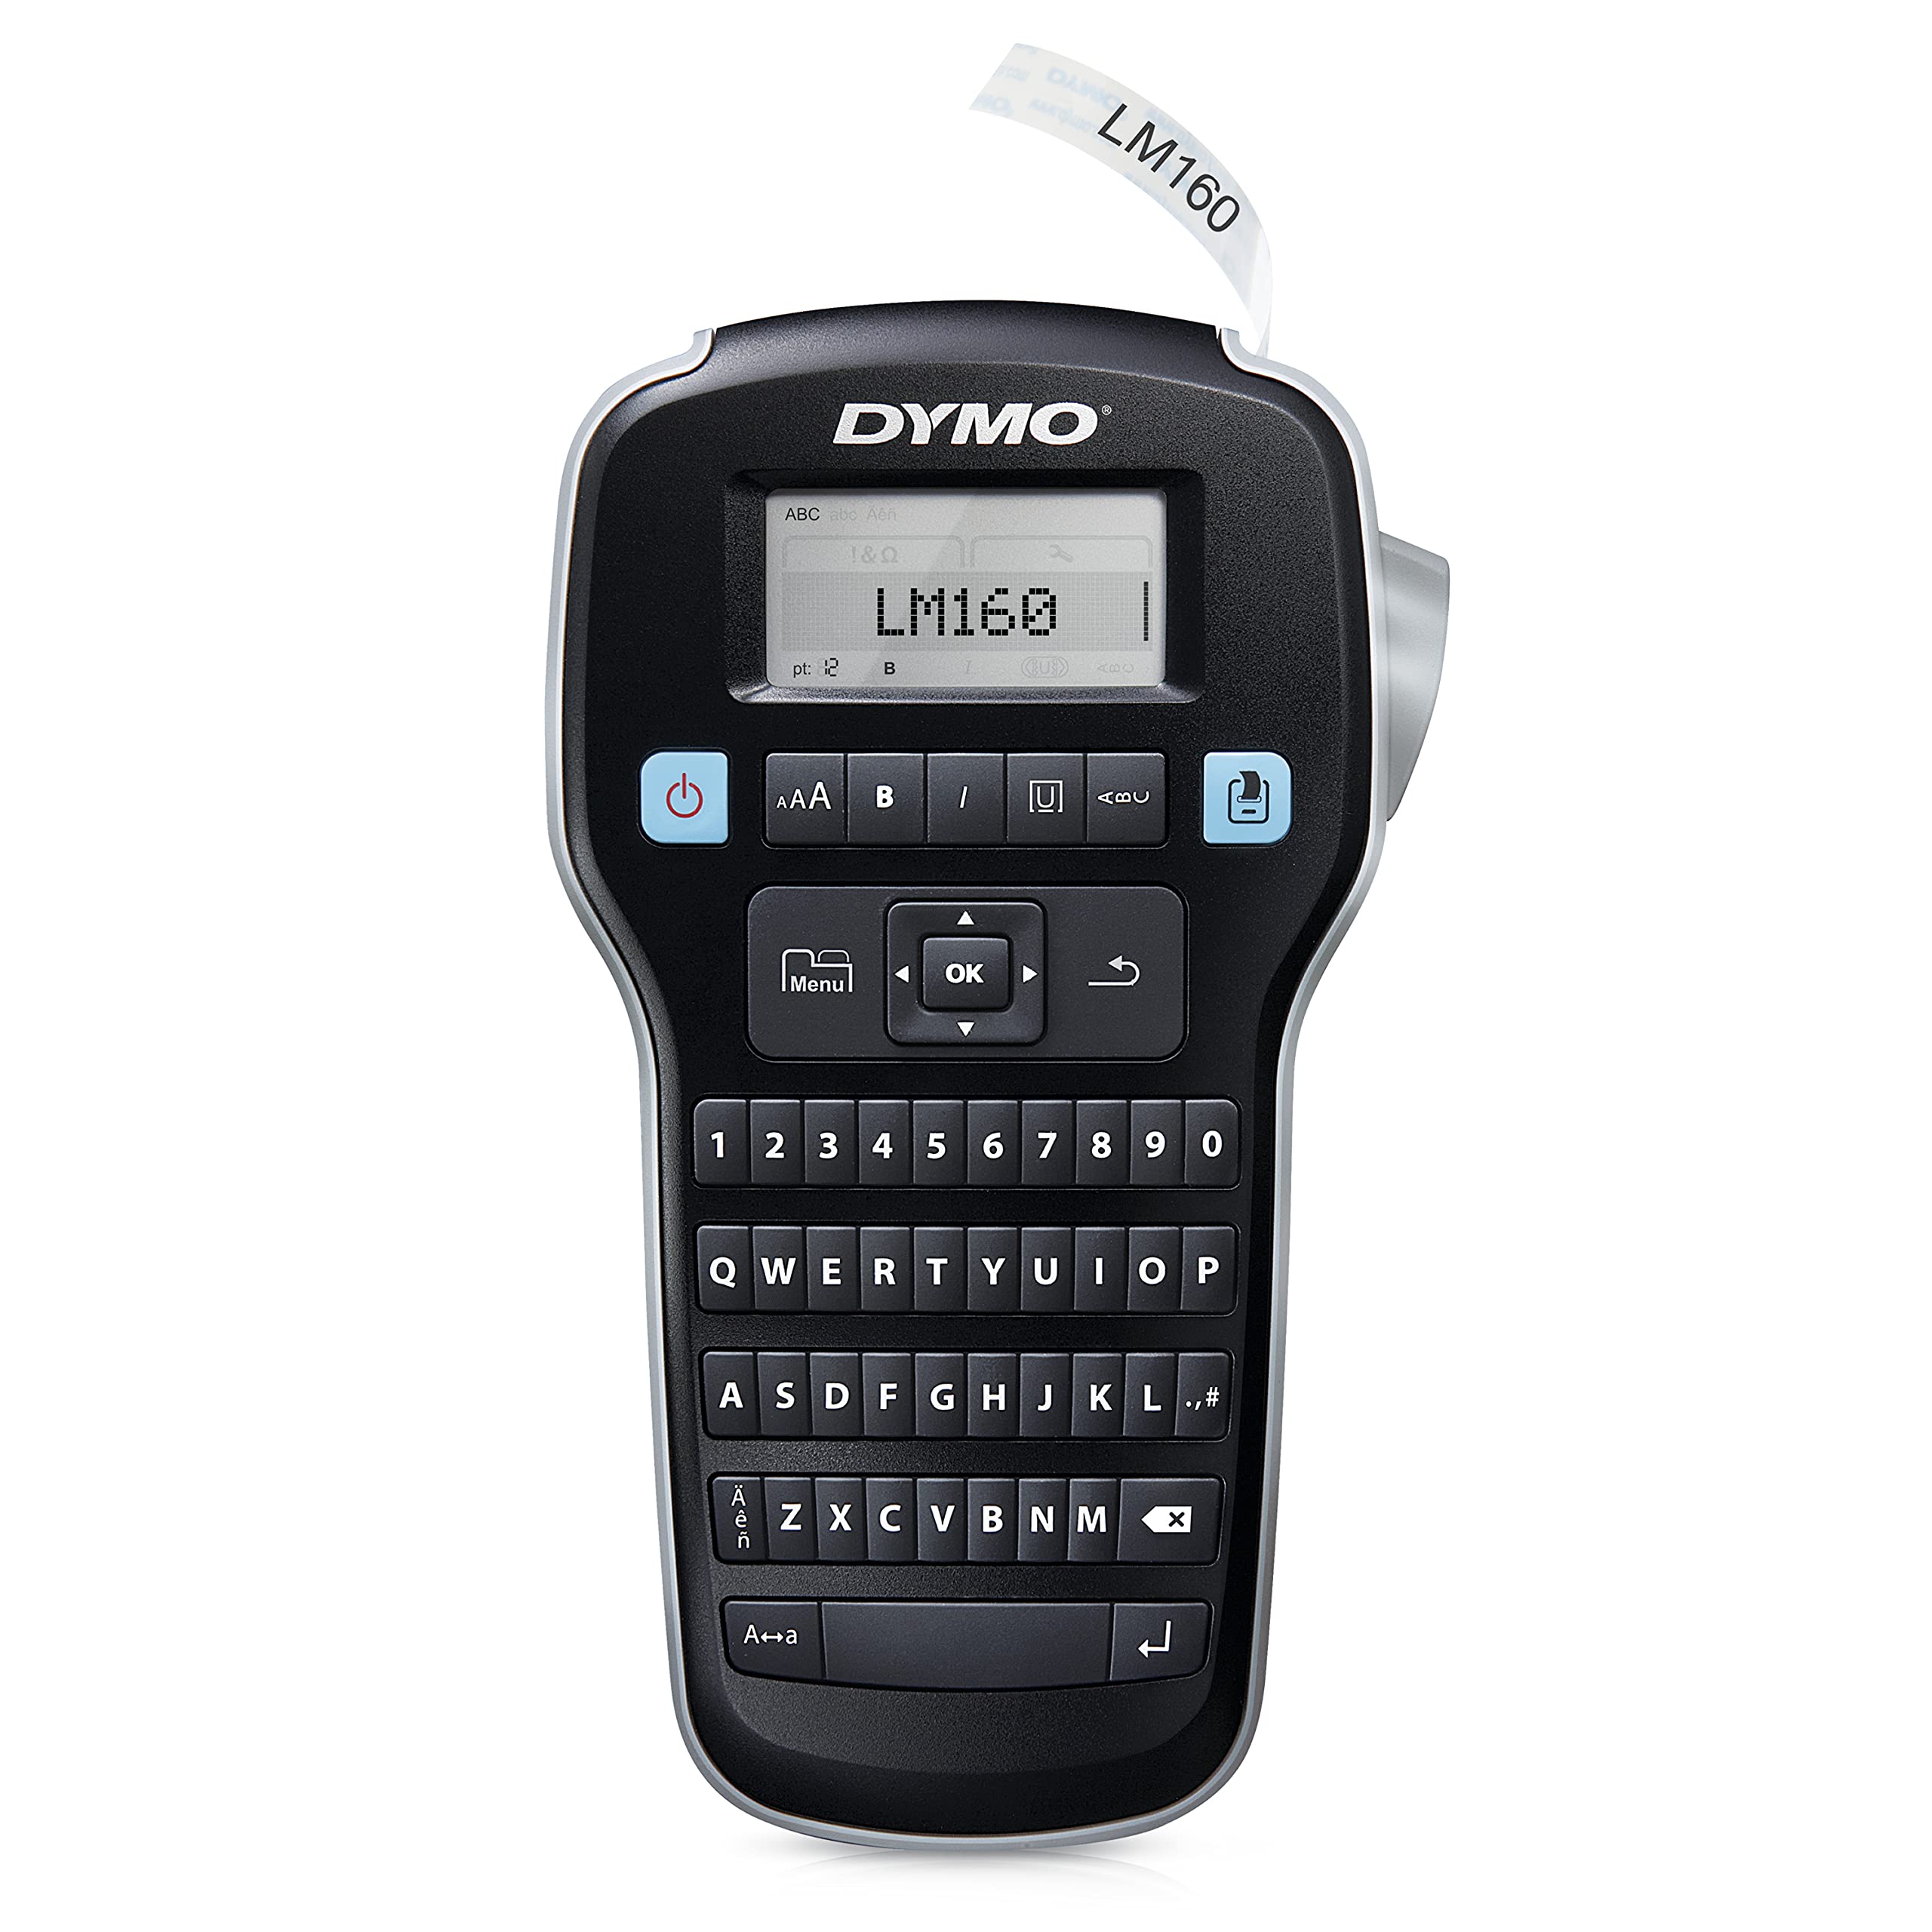 DYMO LabelManager 160 Portable Label Maker Bundle, Easy-to-Use, One-Touch Smart Keys, QWERTY Keyboard, Large Display, for Home & Office Organization, Includes 3 D1 Label Cassettes